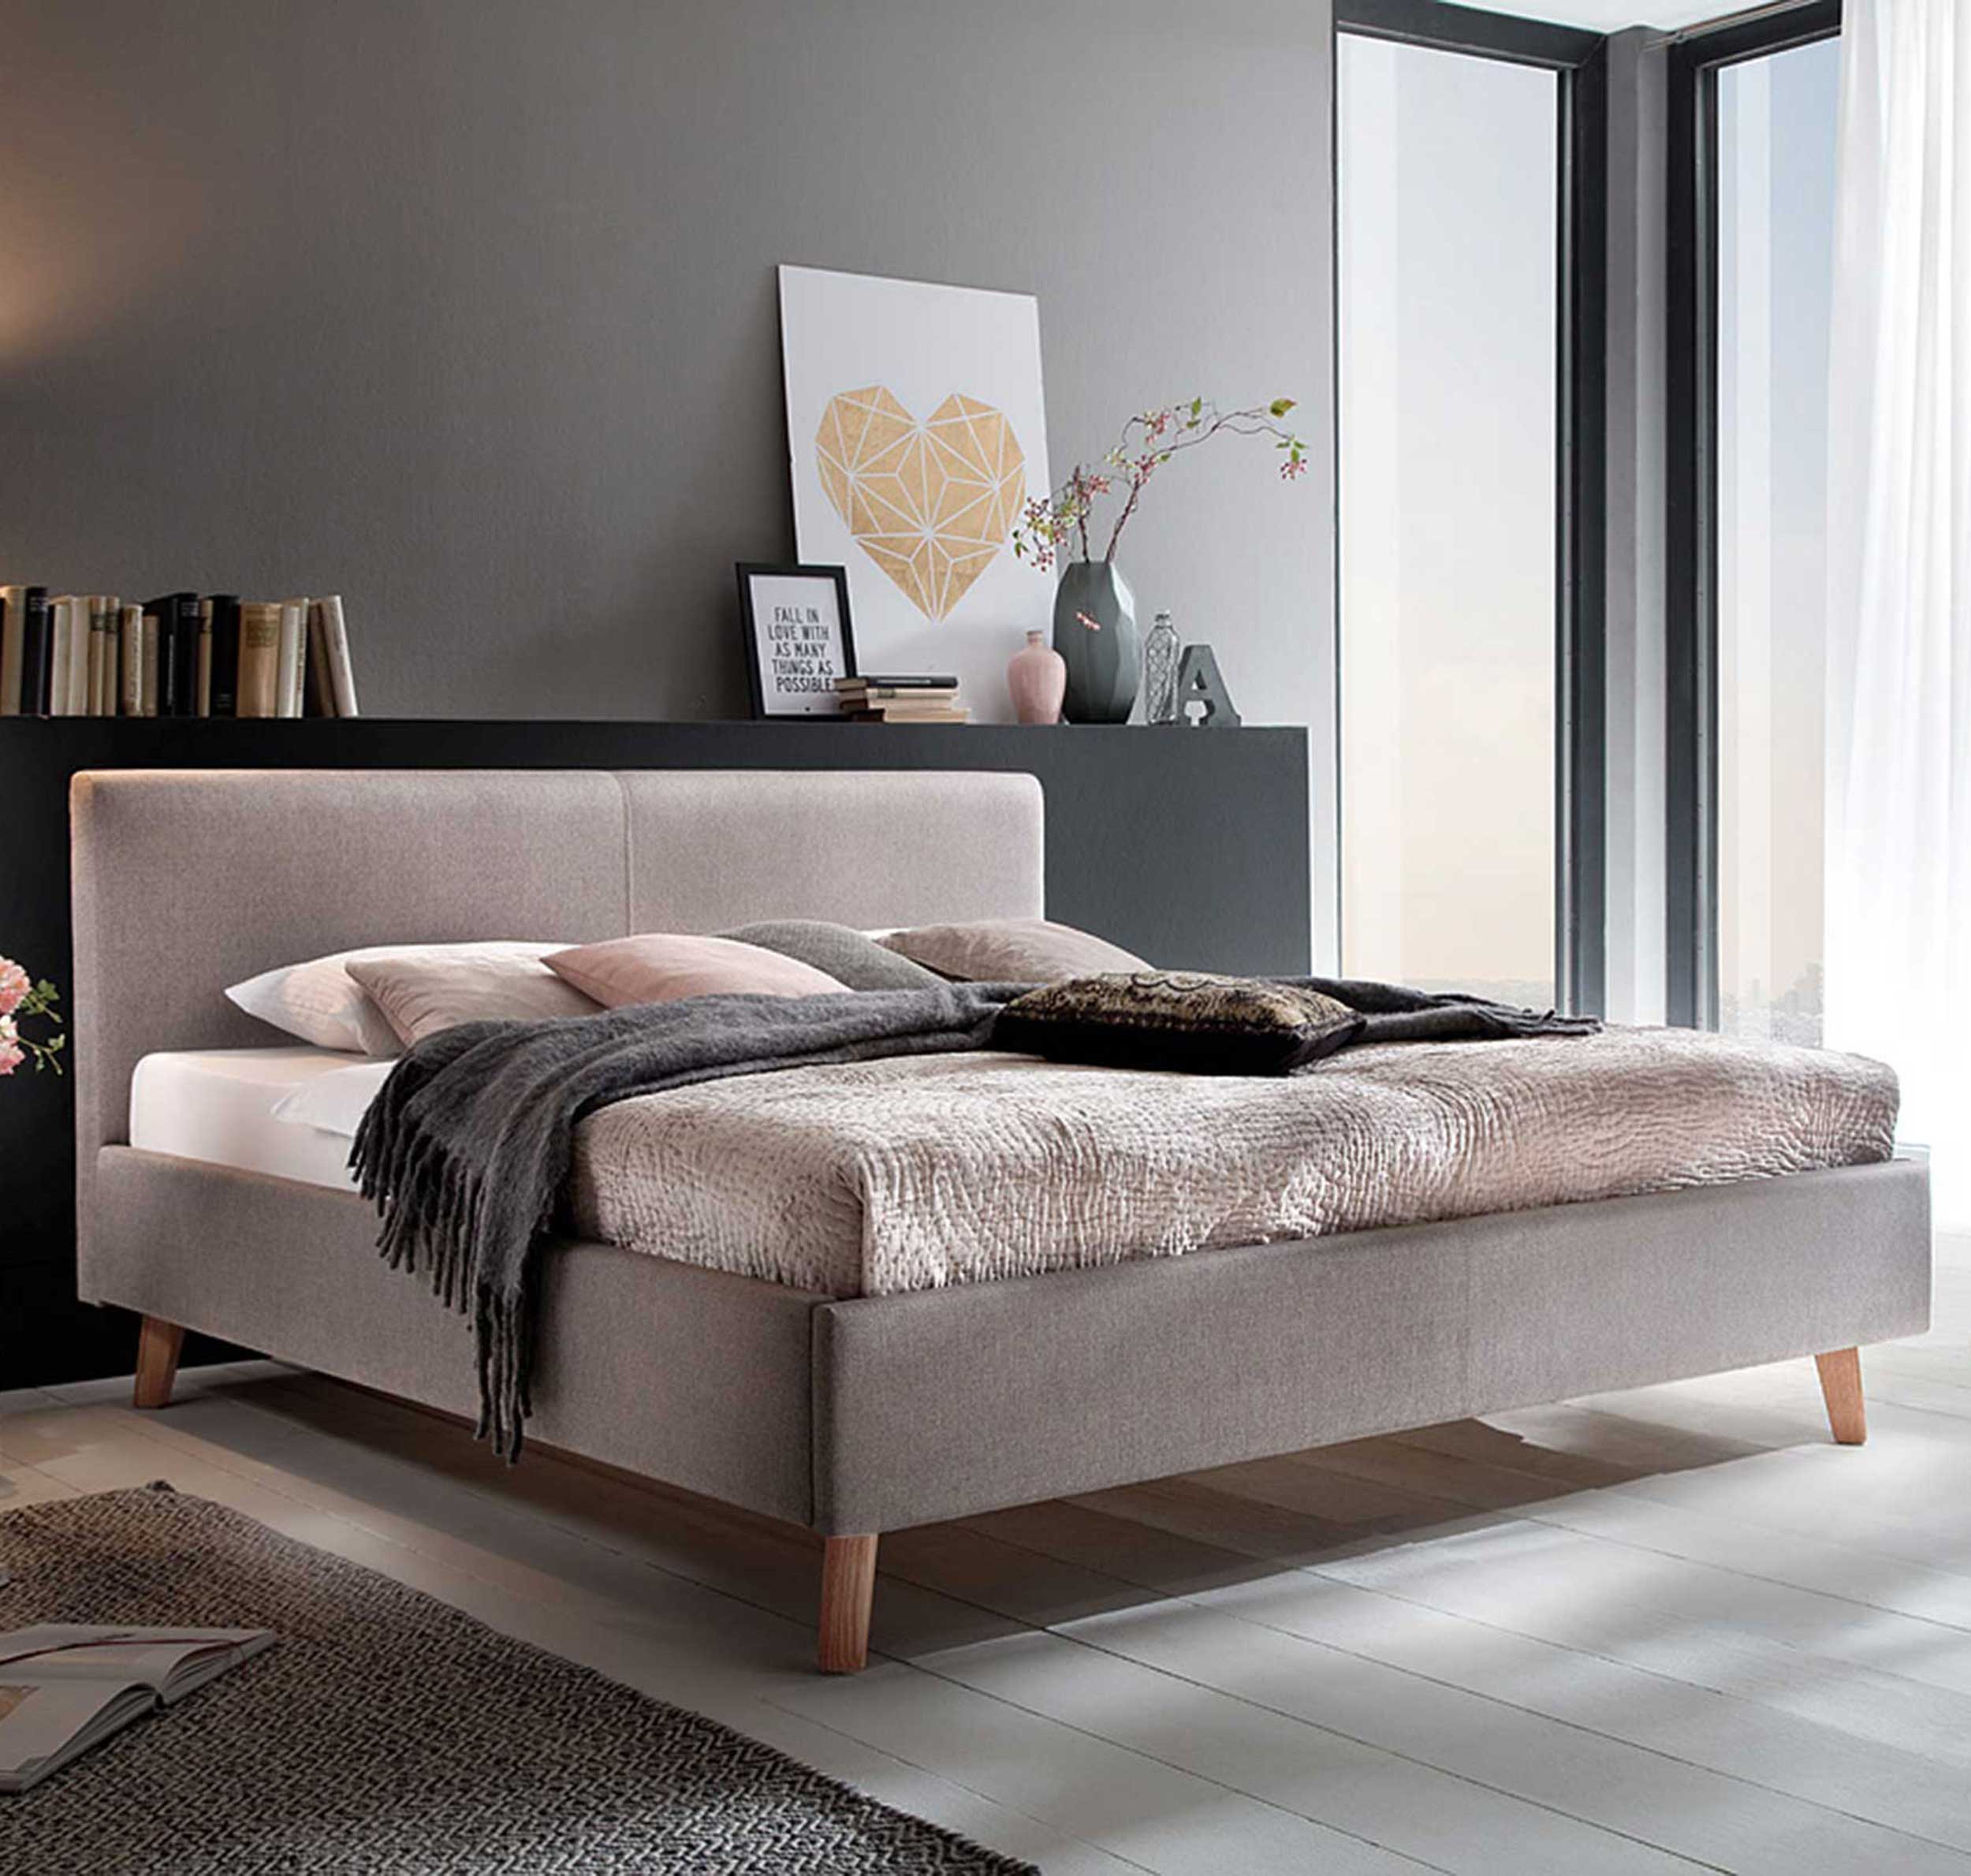 Meise Bed Sem 160x200 - taupe